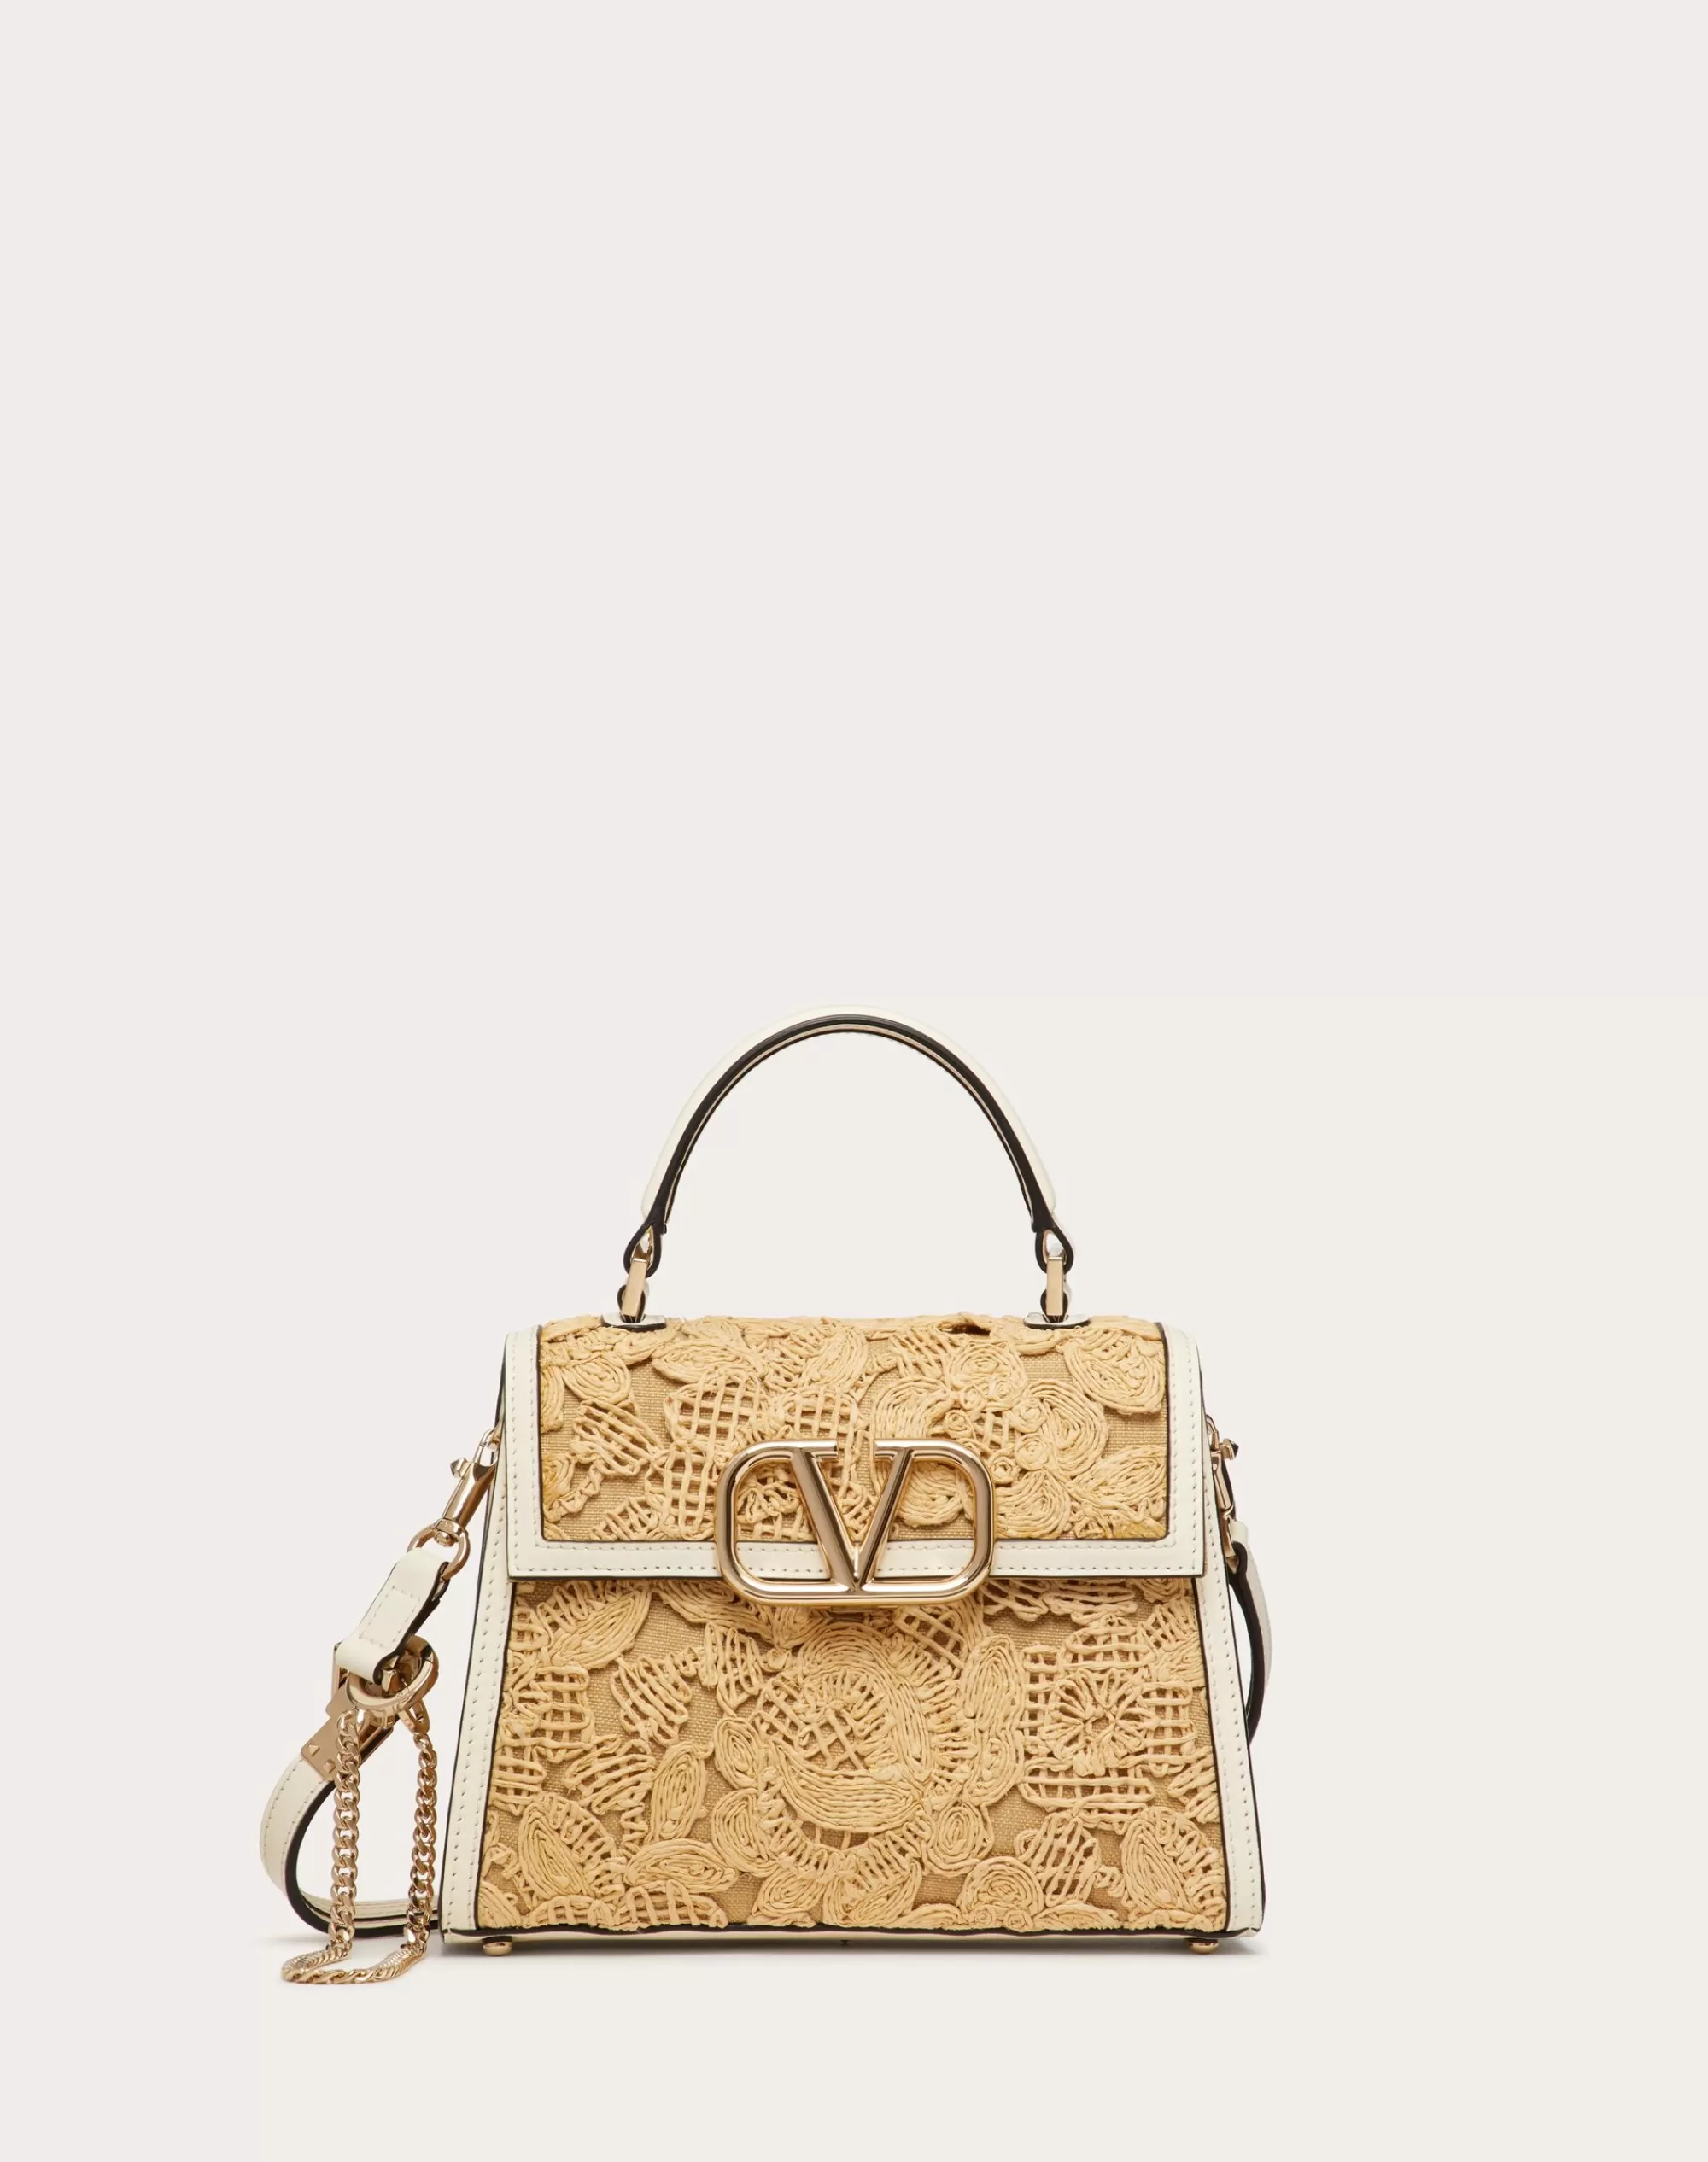 Valentino SMALL VSLING HANDBAG IN LACE-EFFECT RAFFIA Natural/ivory Best Sale